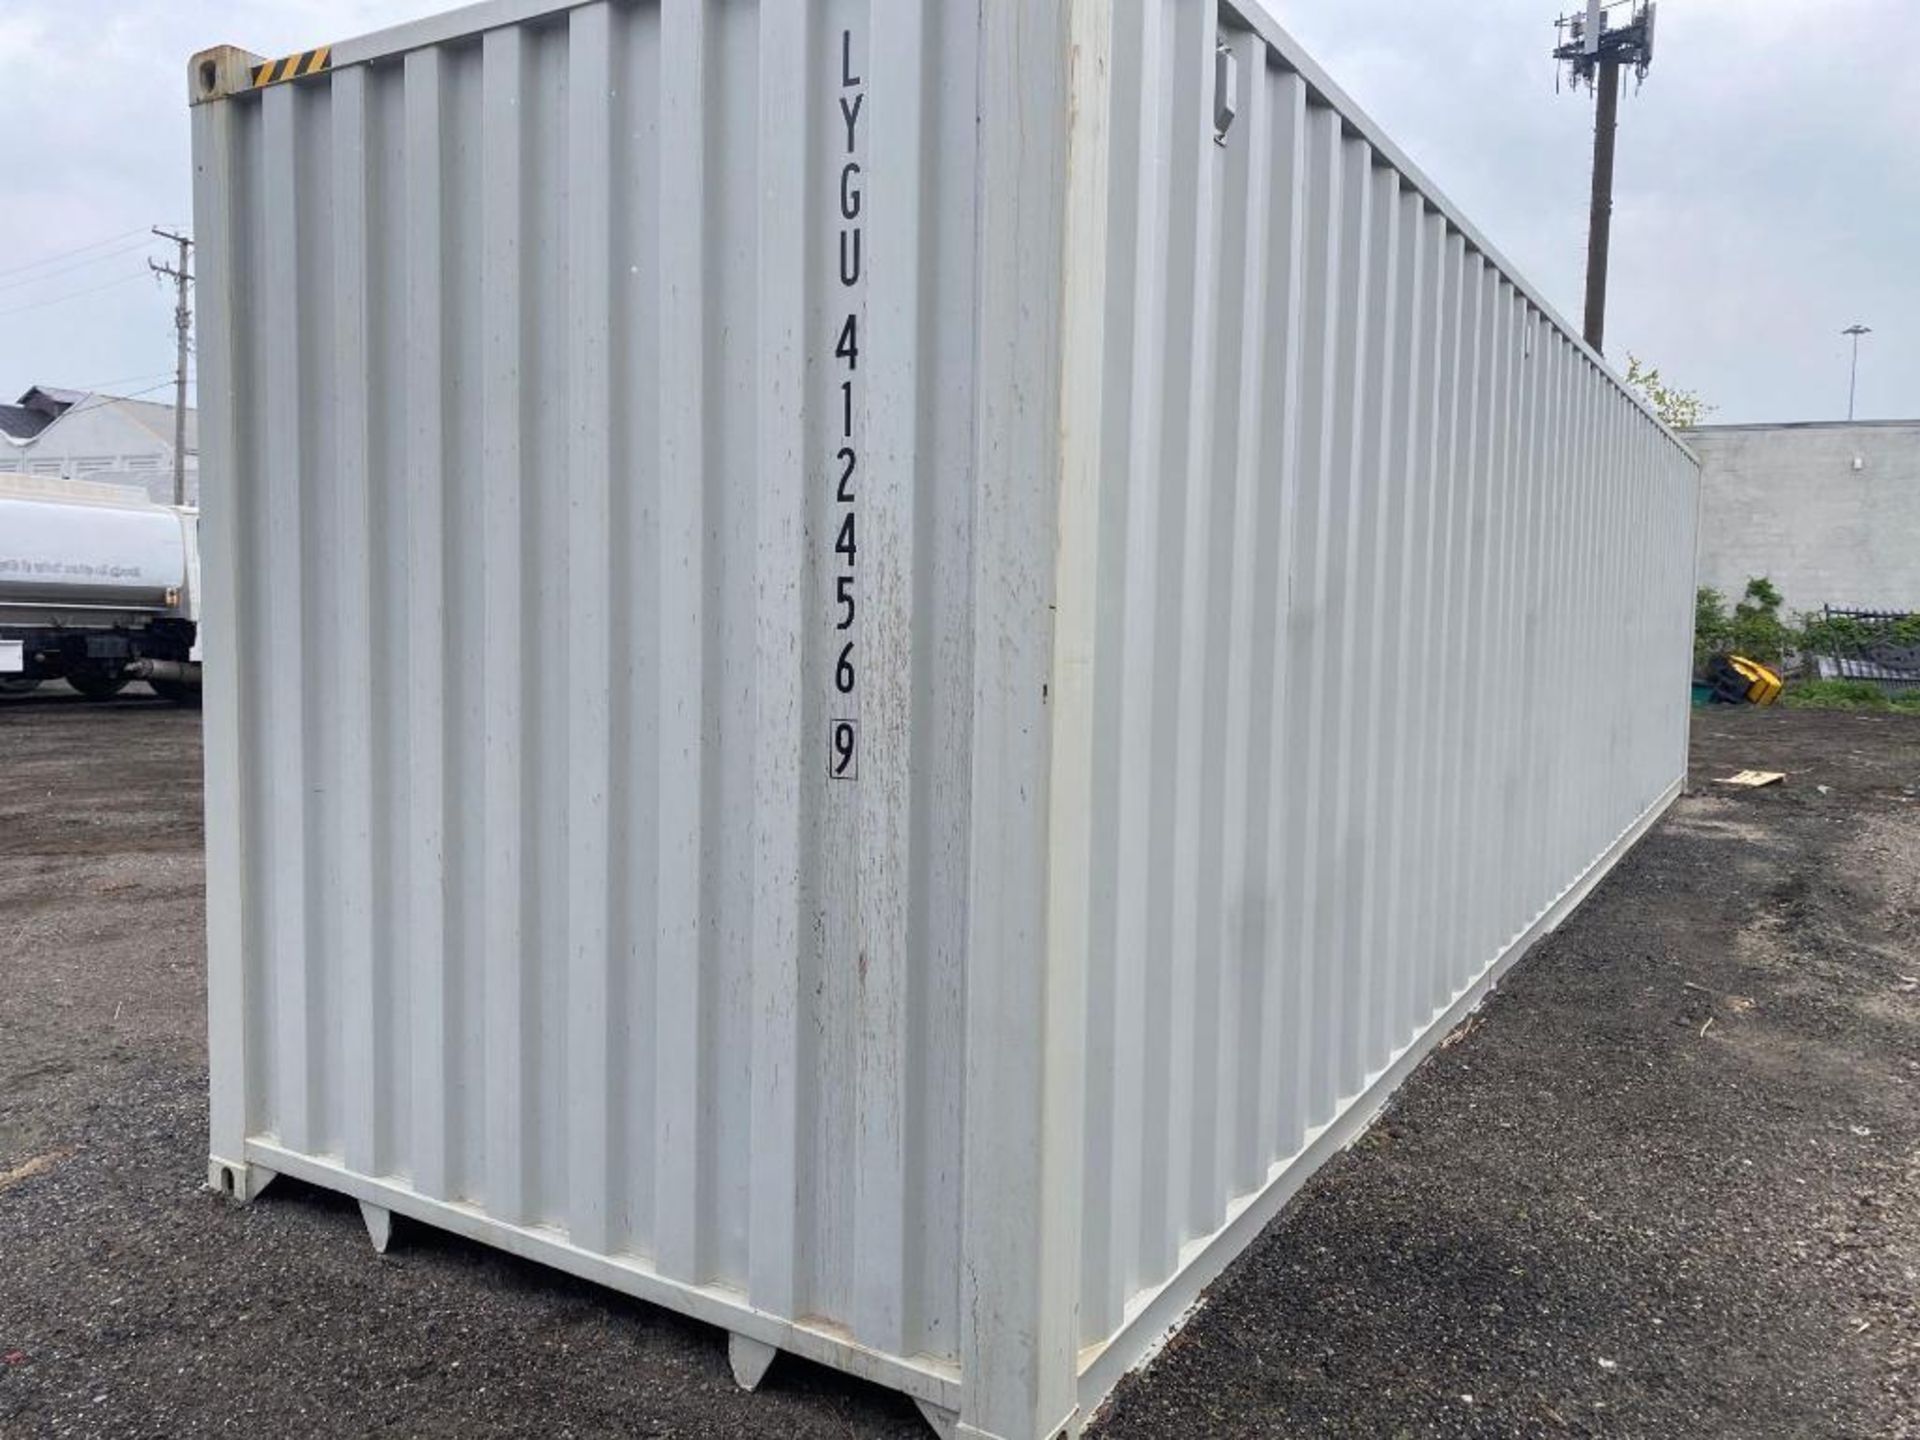 New Dong Fang International 40ft (4 side door) Steel Shipping/Storage Container - Image 6 of 6